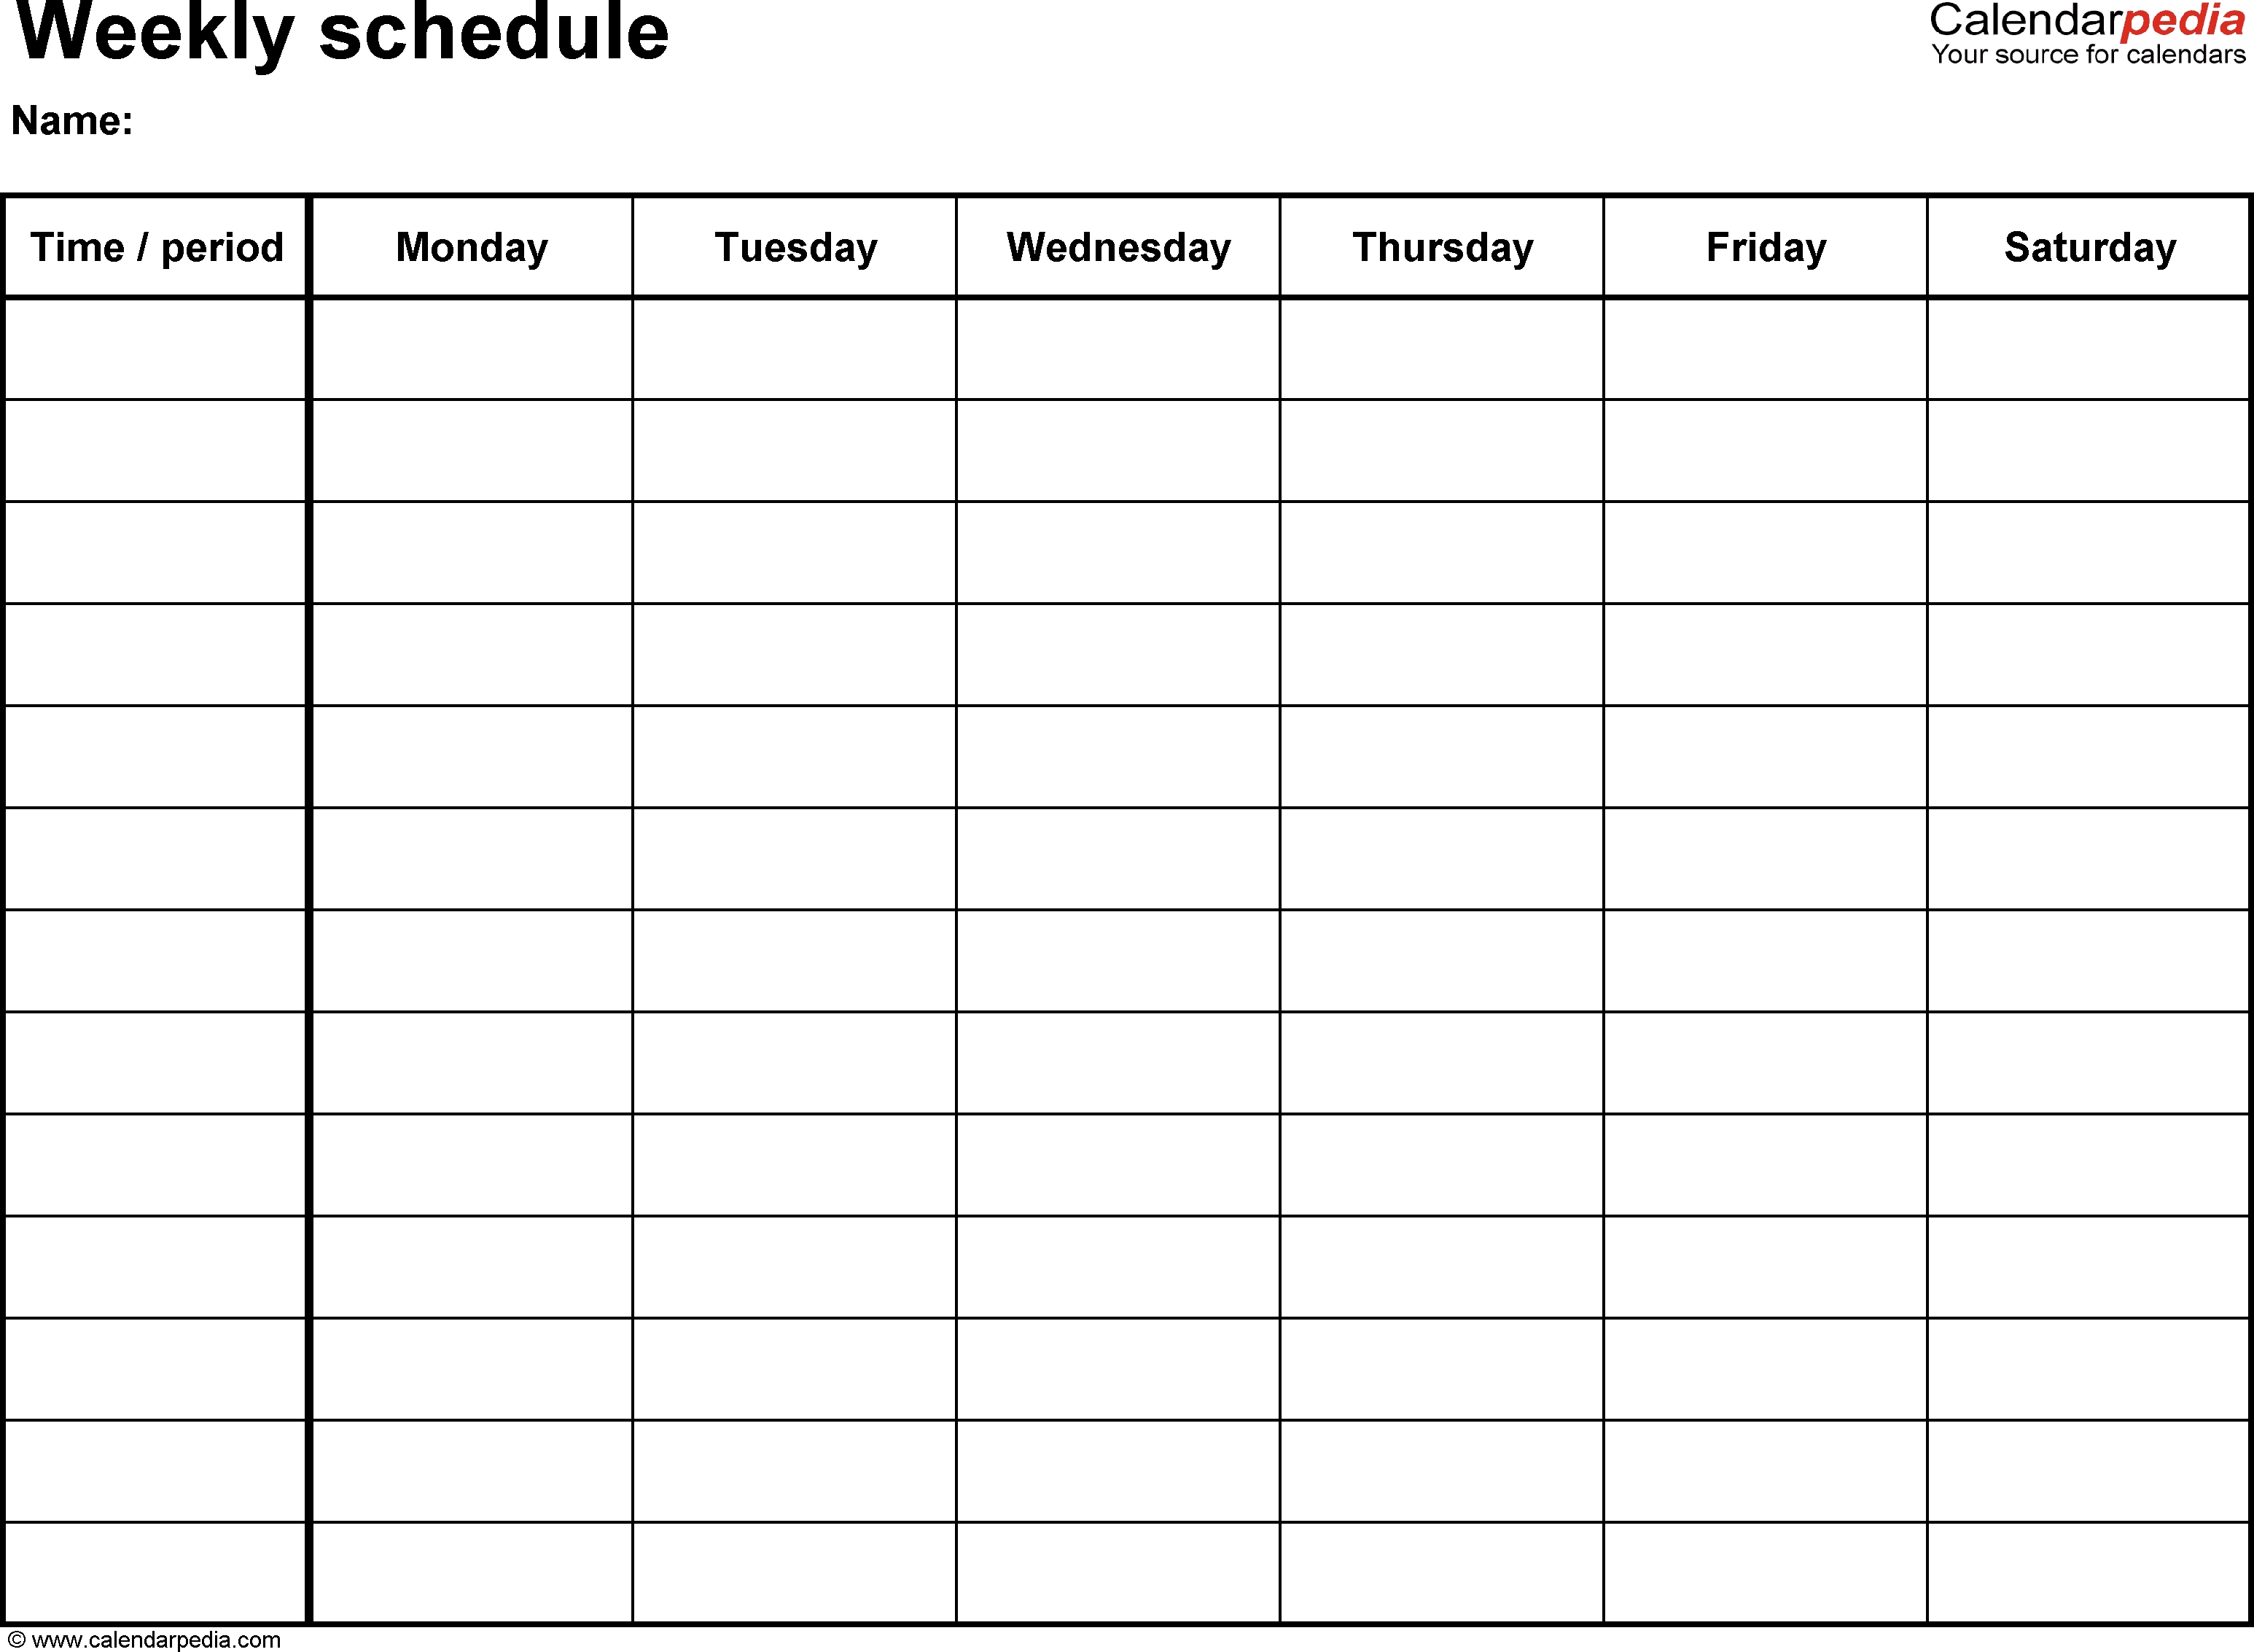 Free Weekly Schedule Templates For Pdf - 18 Templates with regard to Free Printable Weekly Planner Calendars